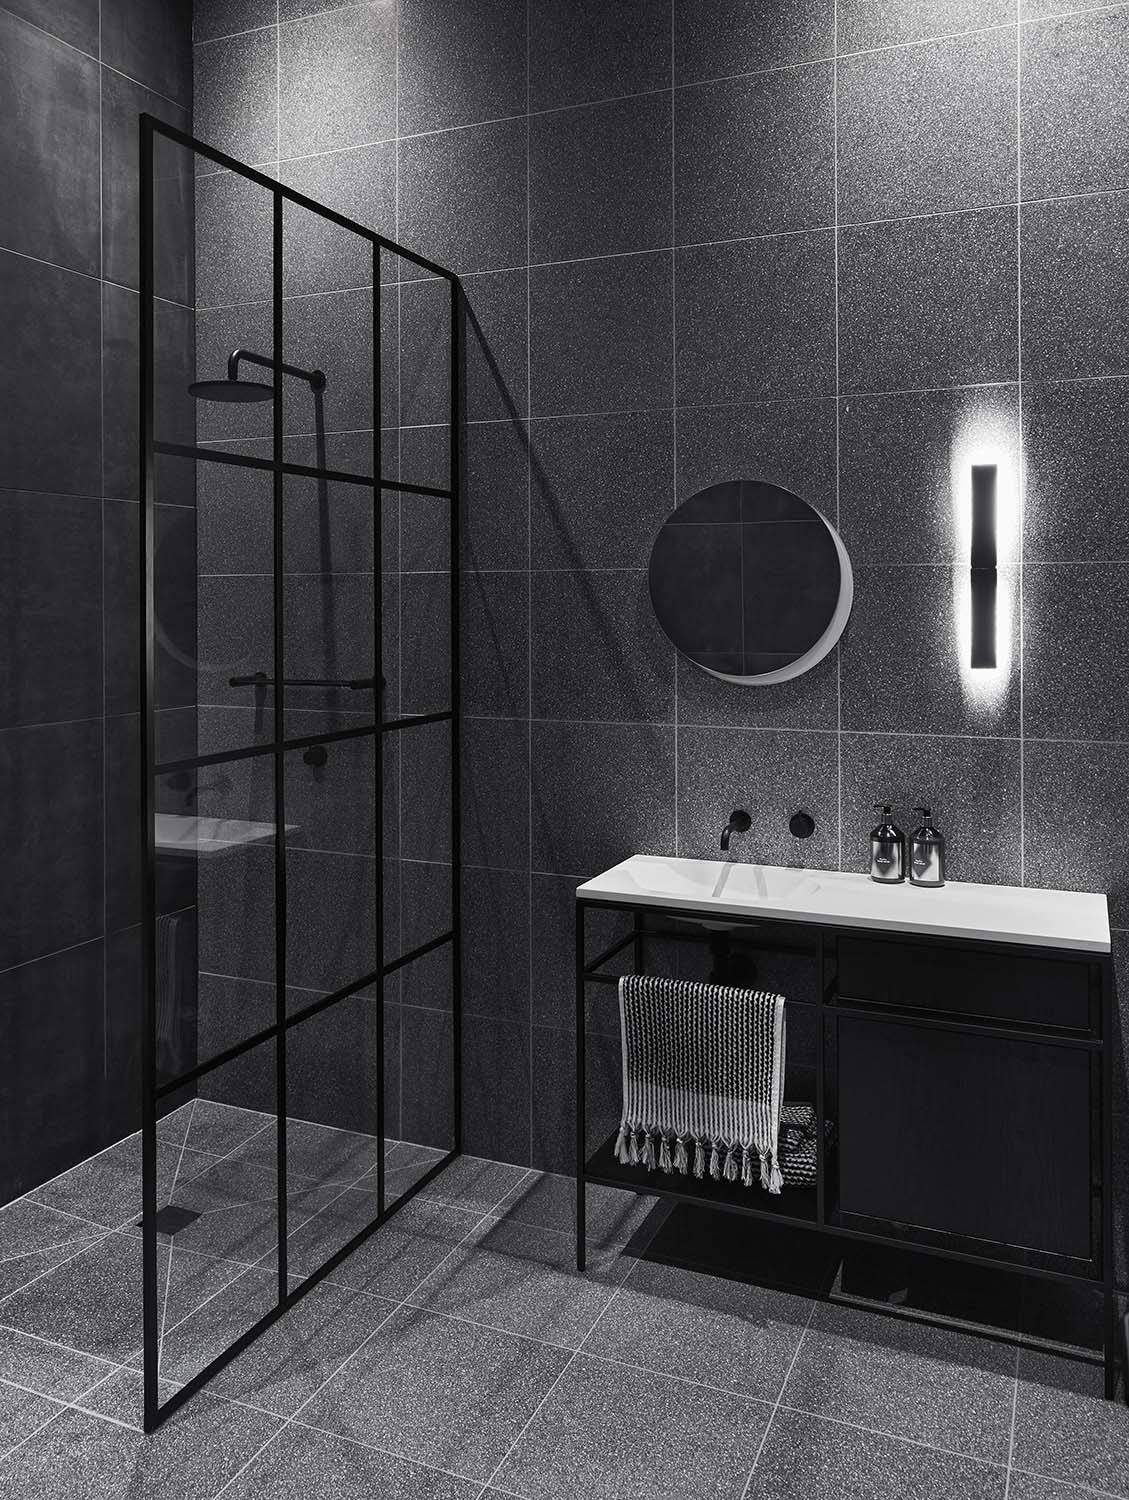 Black and gray bathroom with black fixtures and fittings.  A black bathroom sconce brings light to the mirror.